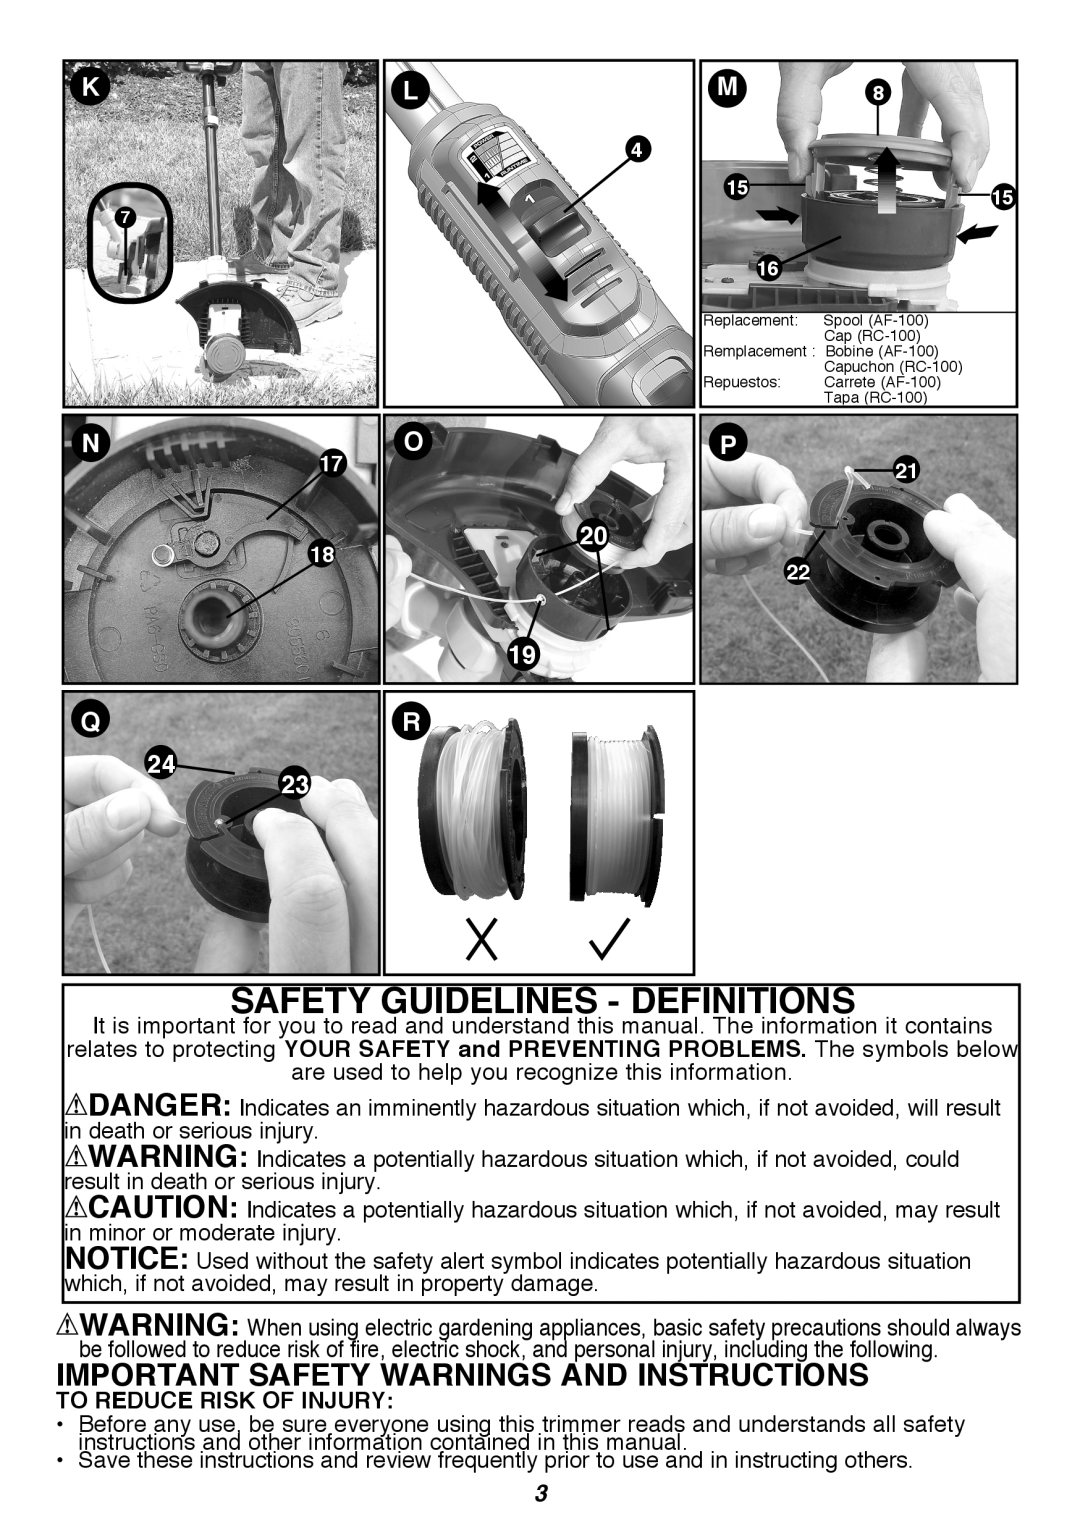 Black & Decker LST420 instruction manual Safety Guidelines - Definitions, Important Safety Warnings And Instructions 